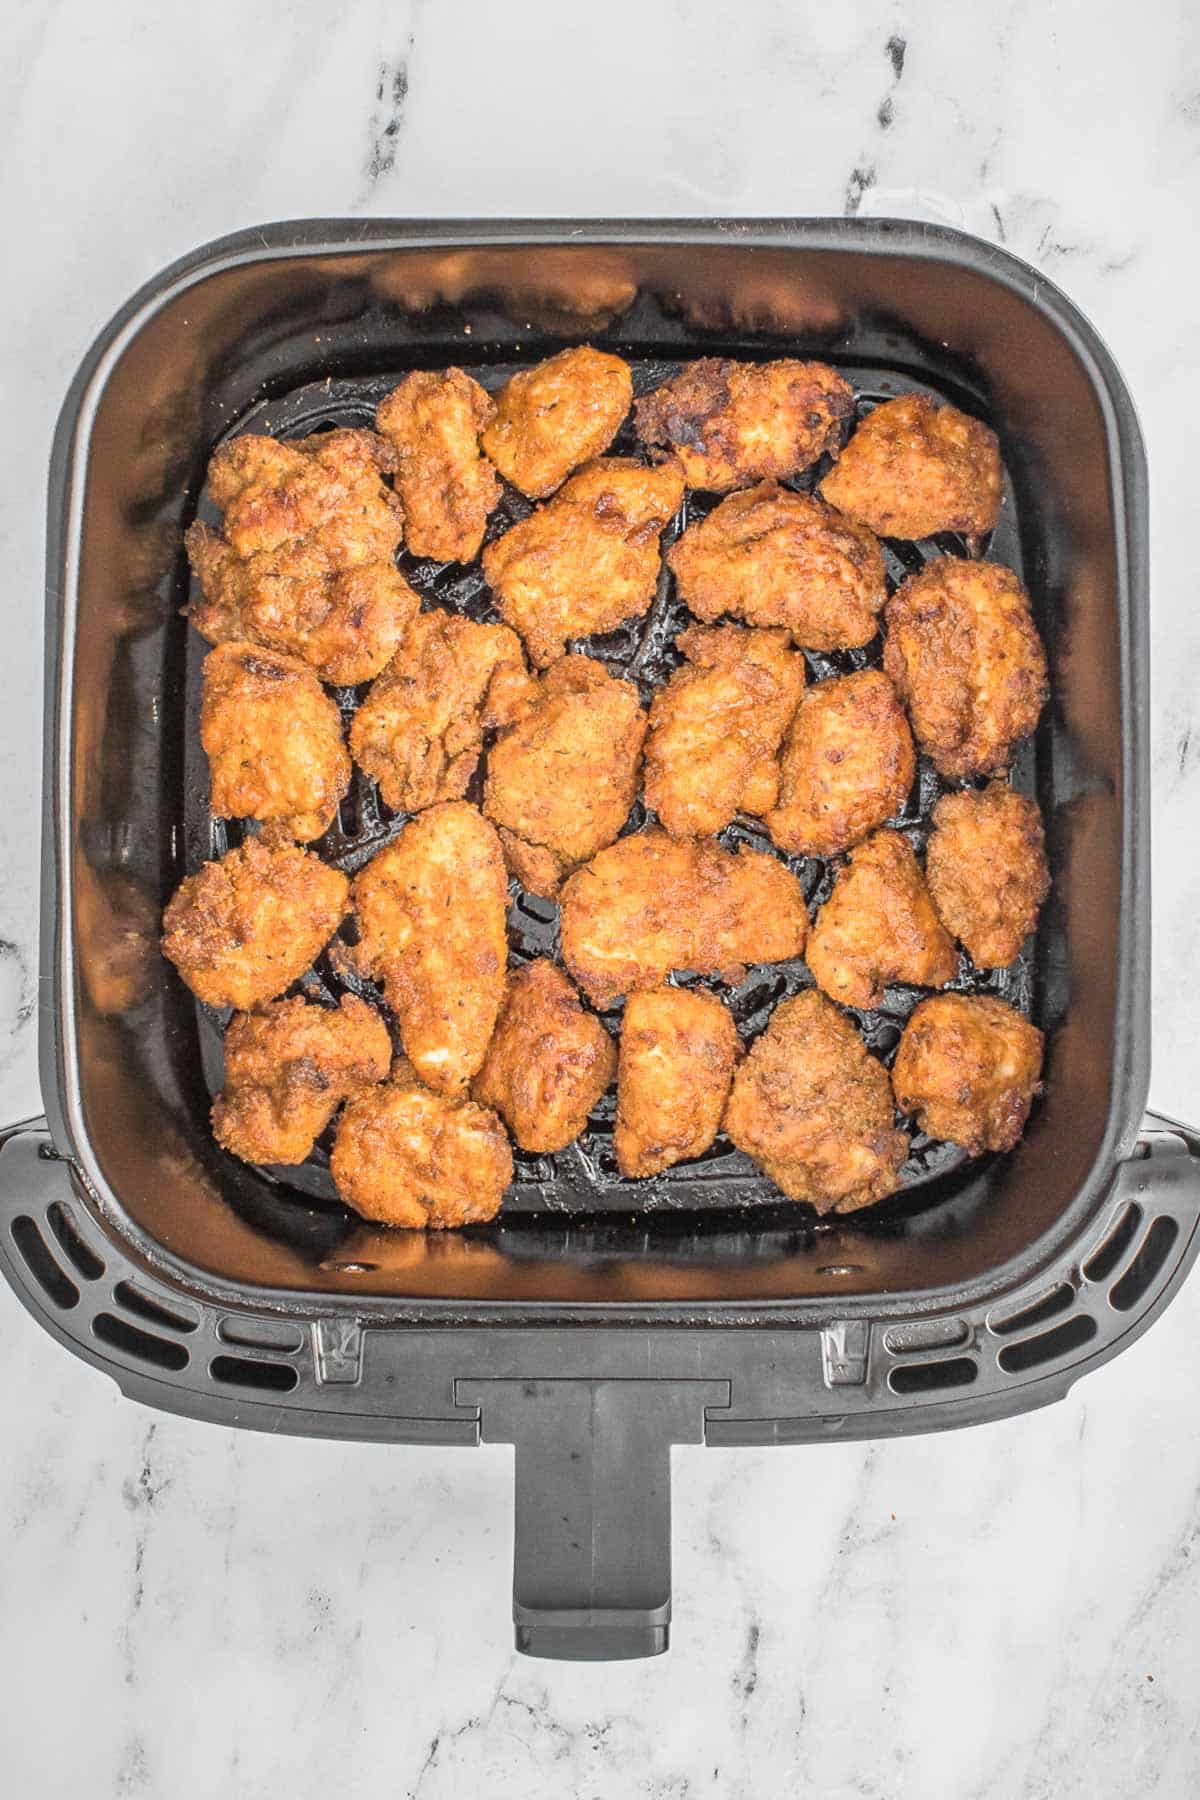 Fried chicken nuggets in bottom of air fryer.